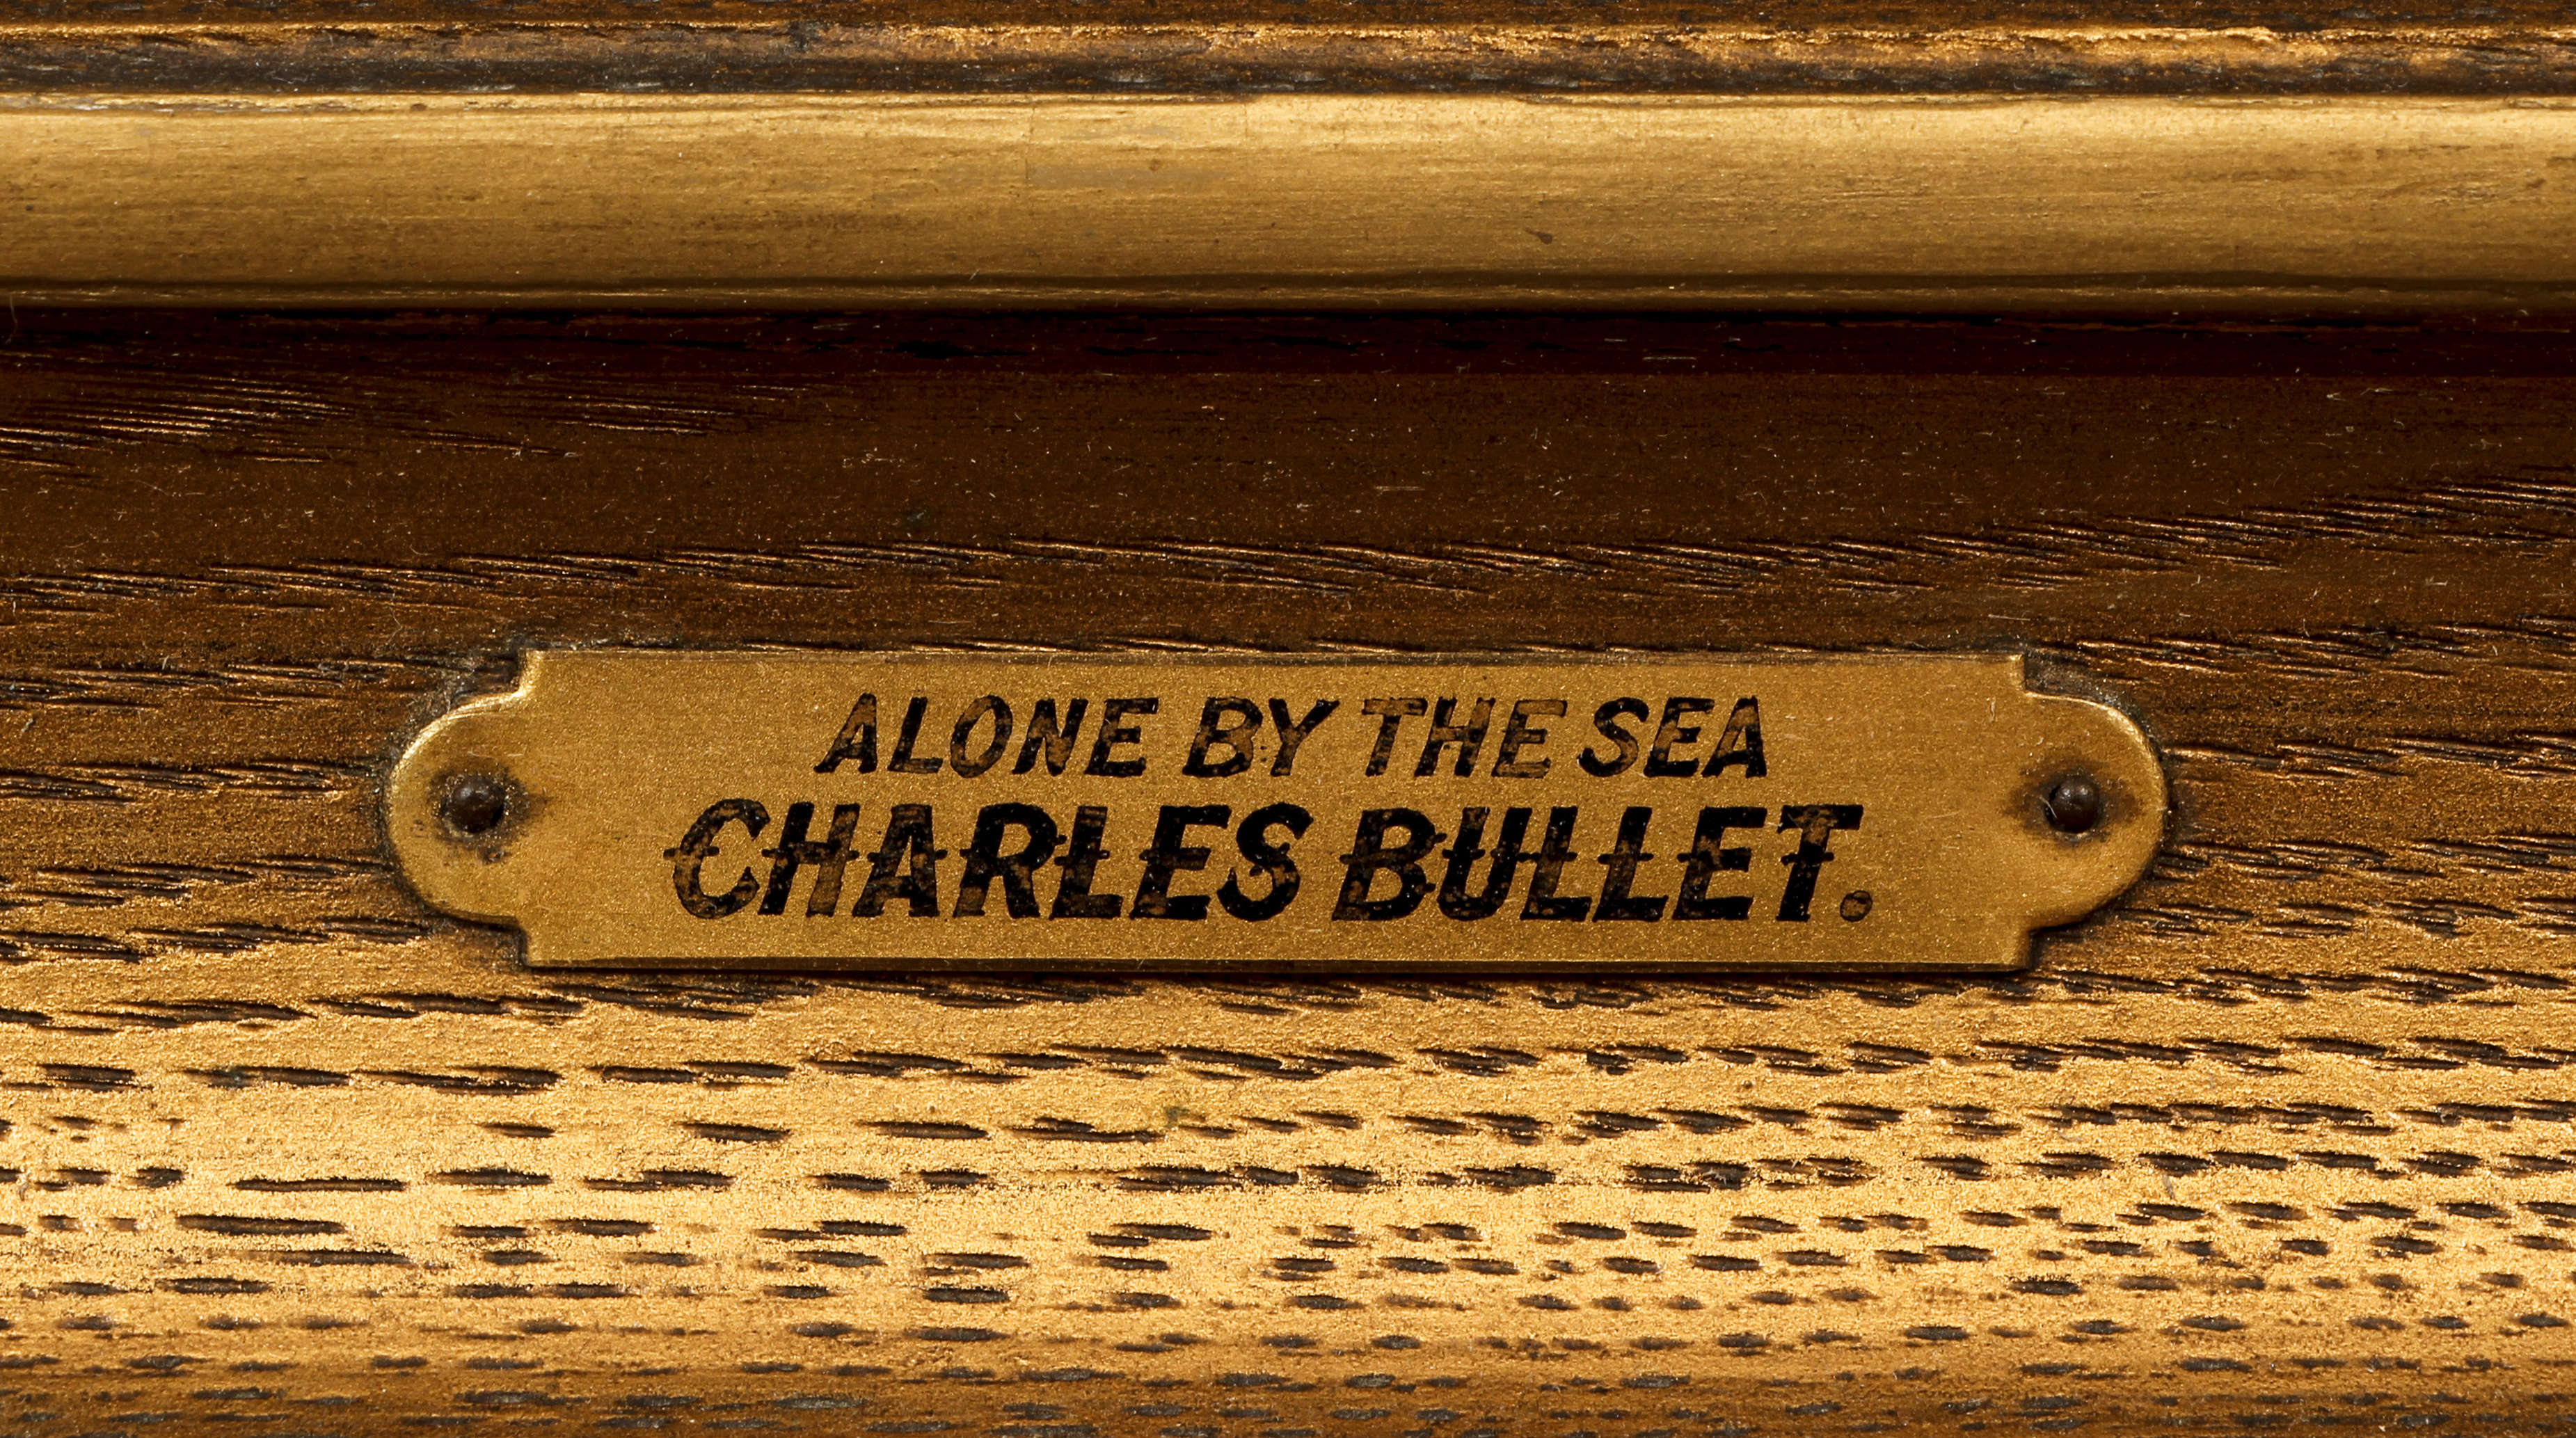 Charles Bullet Alone by the Sea Oil on Board - Image 4 of 5